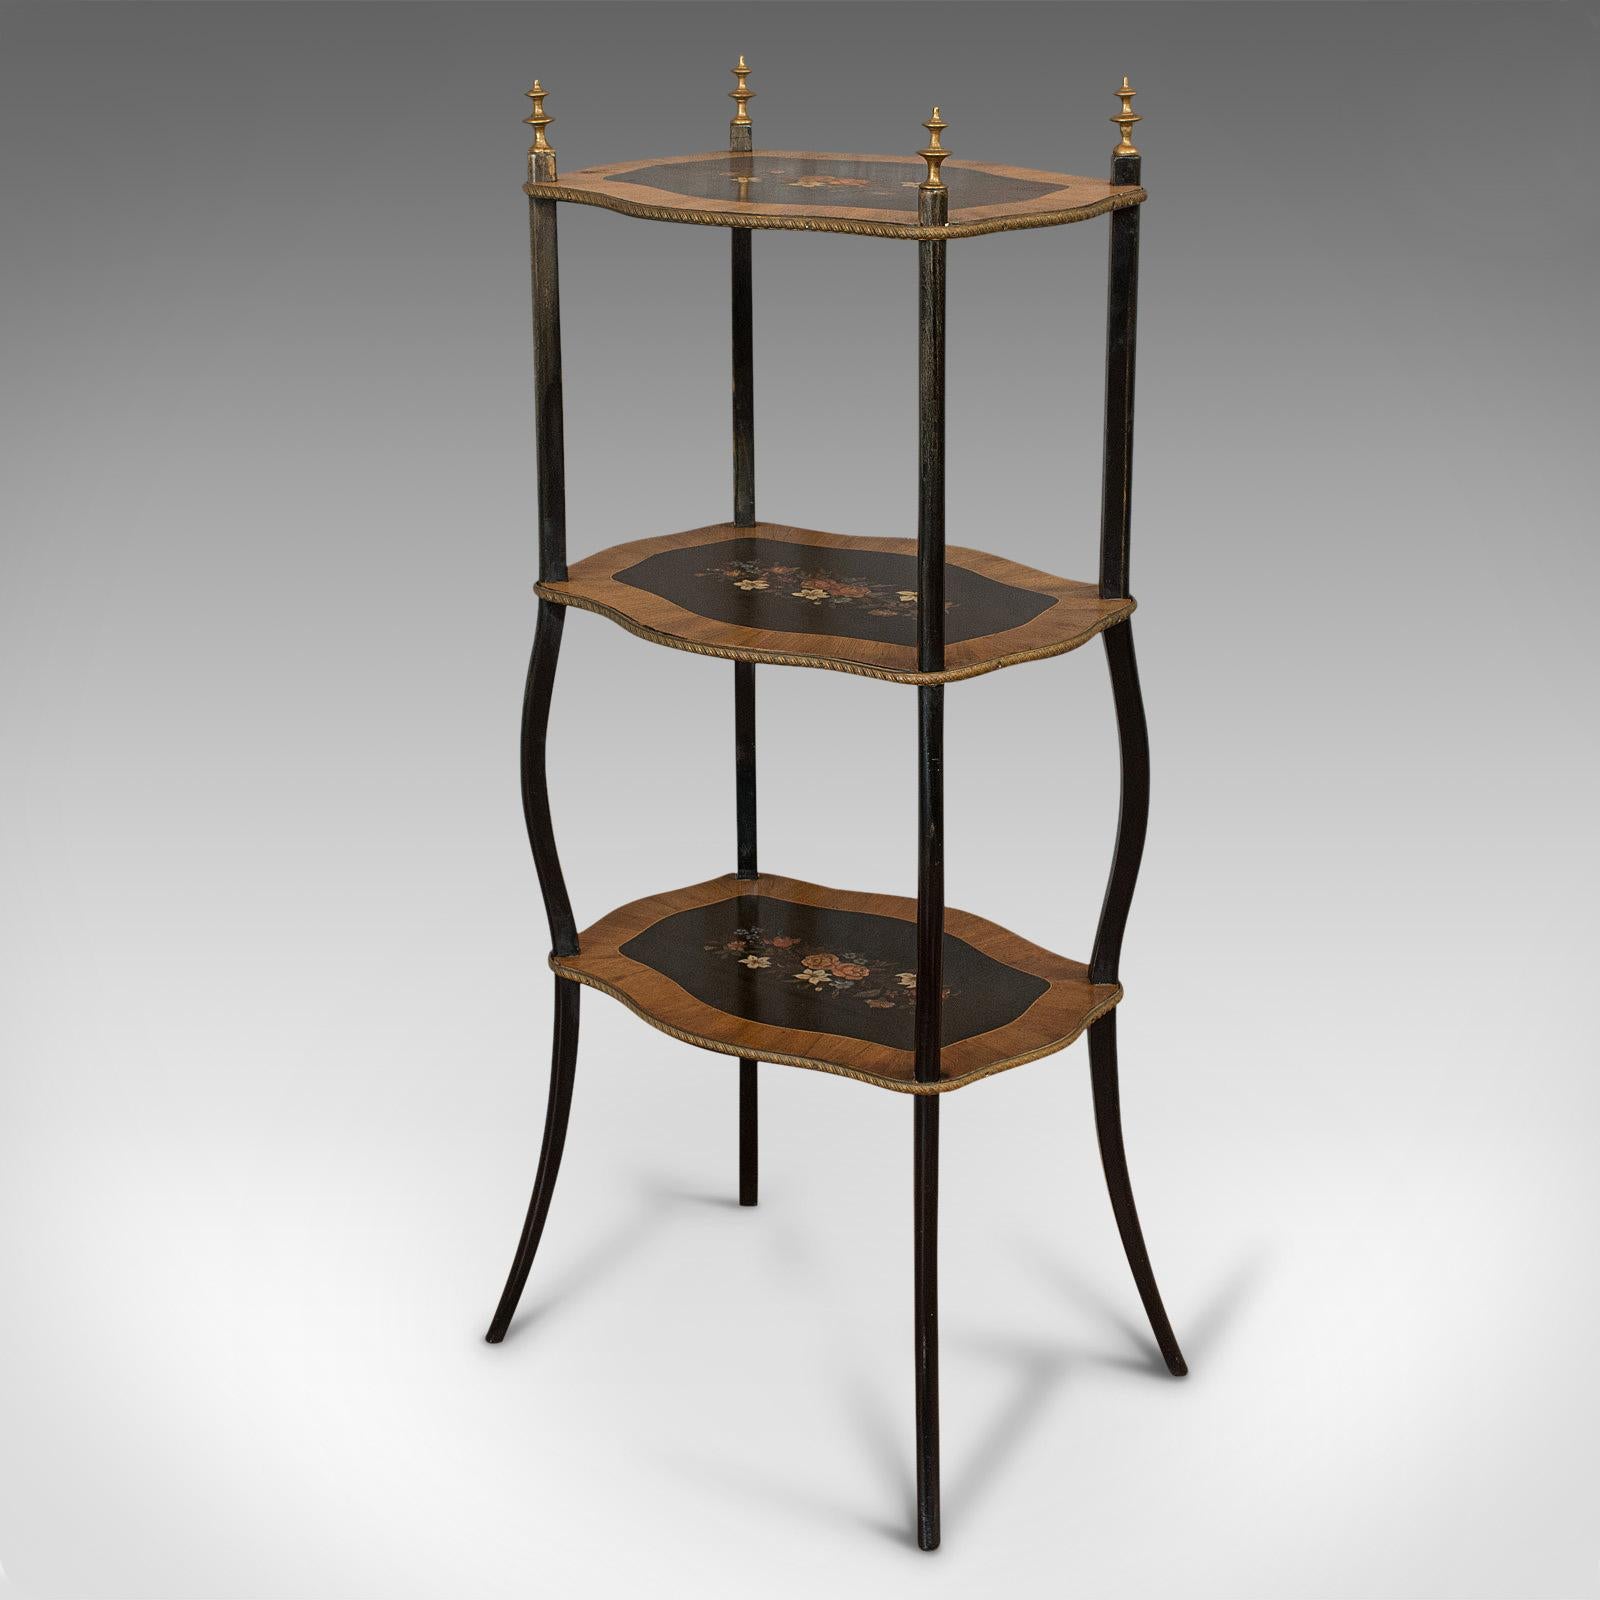 19th Century Antique Étagère, French, Mahogany, 3-Tier, Plant, Stand, Whatnot, Victorian